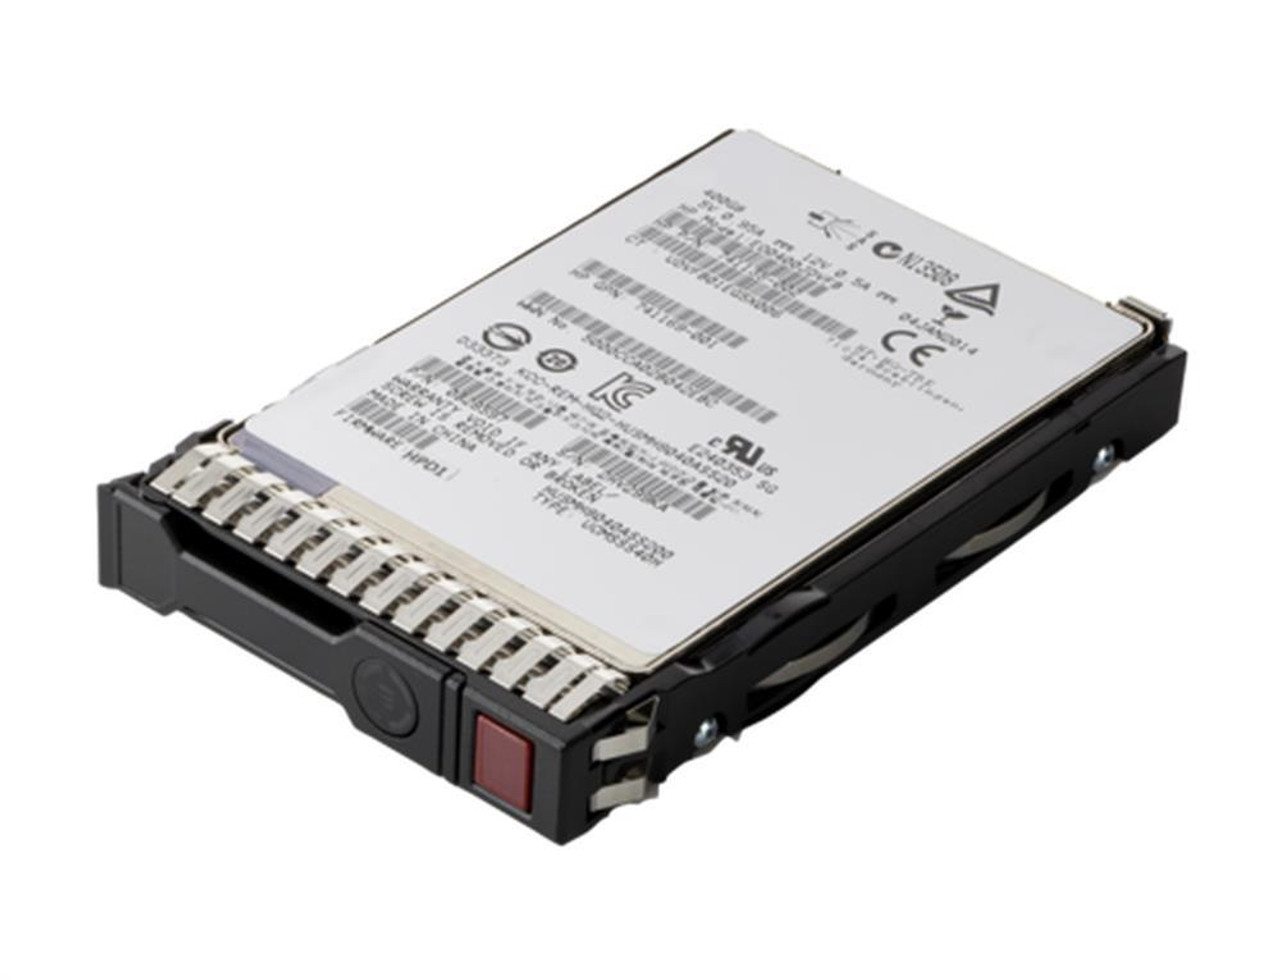 875511-H21#0D1 HPE 960GB SATA 6Gbps Read Intensive 2.5-inch Internal Solid State Drive (SSD) with Smart Carrier